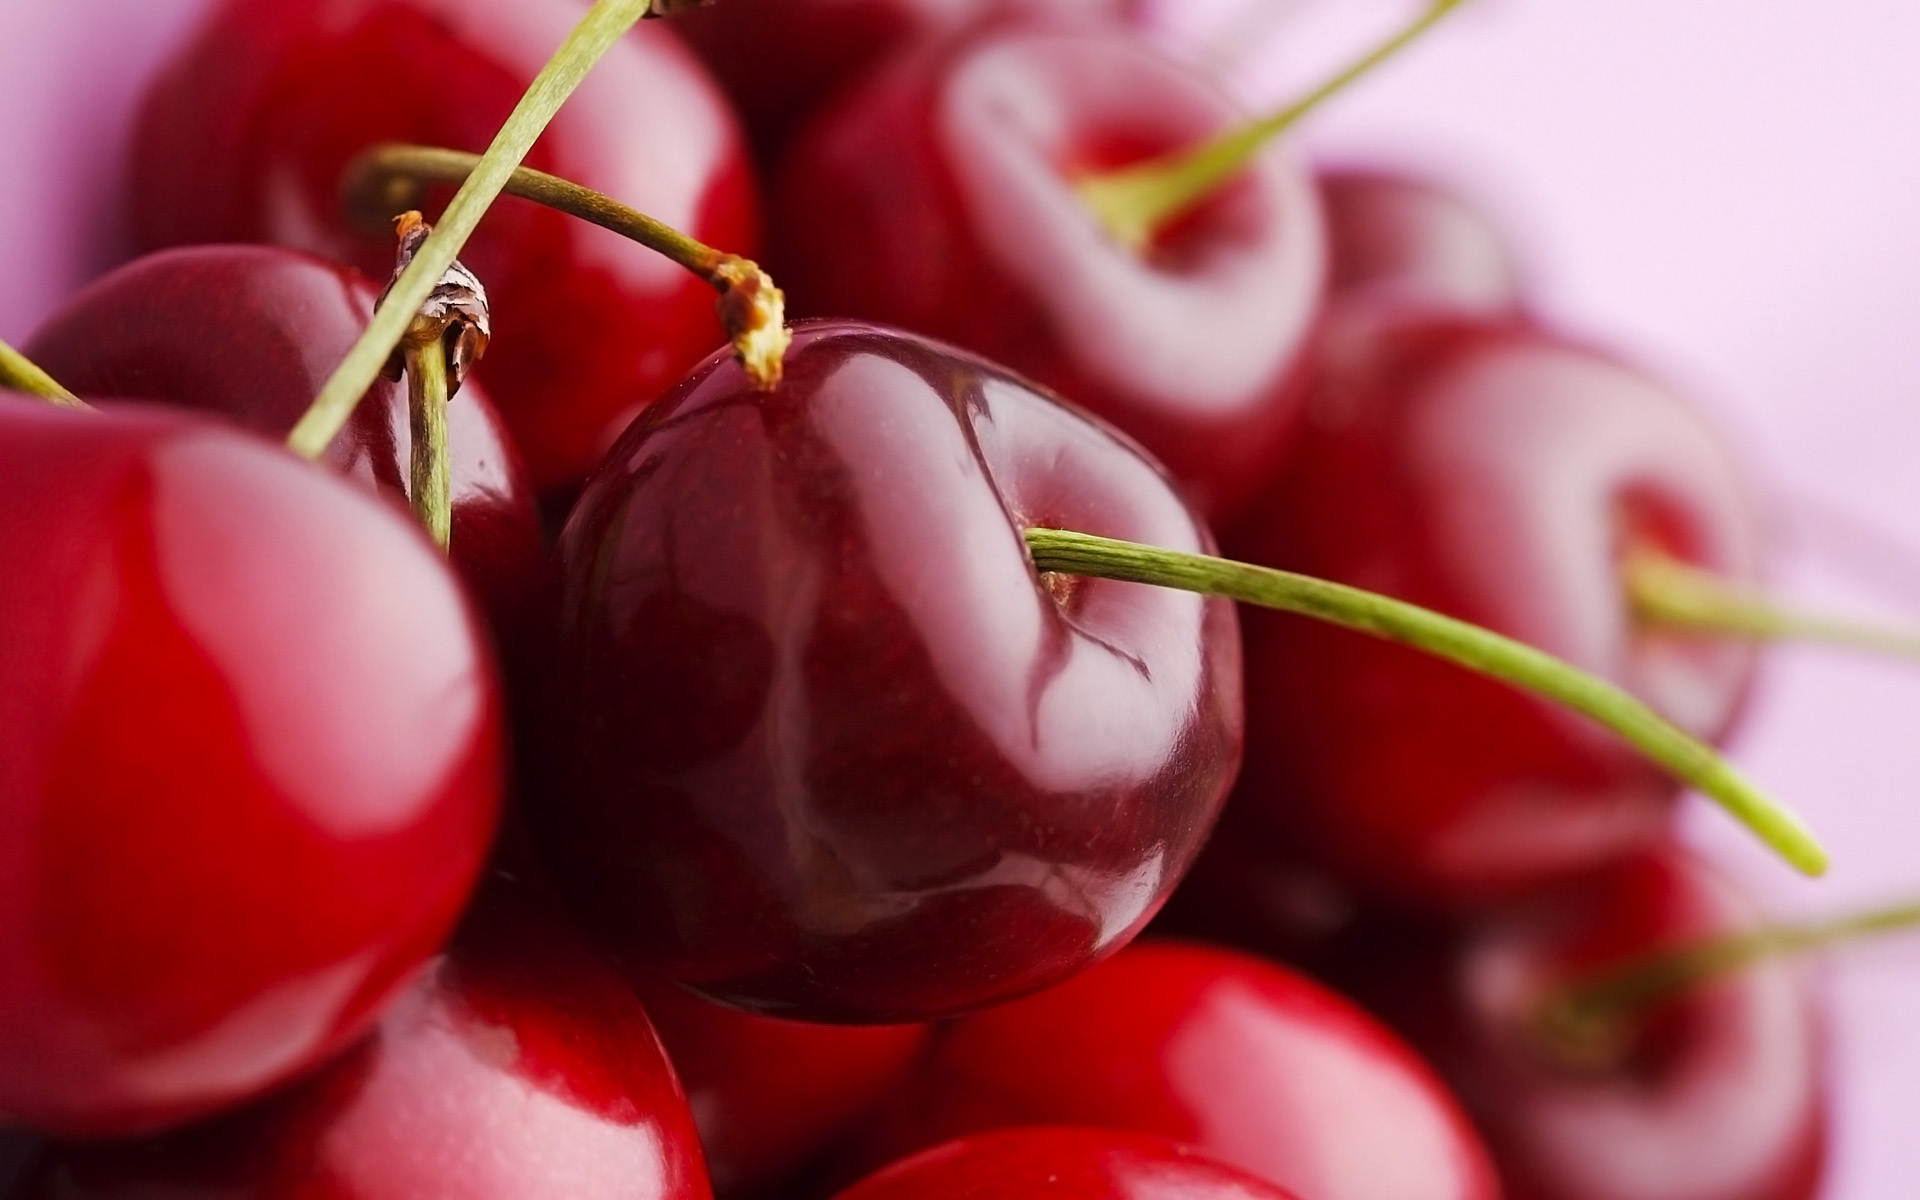 26165 download wallpaper food, fruits, sweet cherry, background, red screensavers and pictures for free